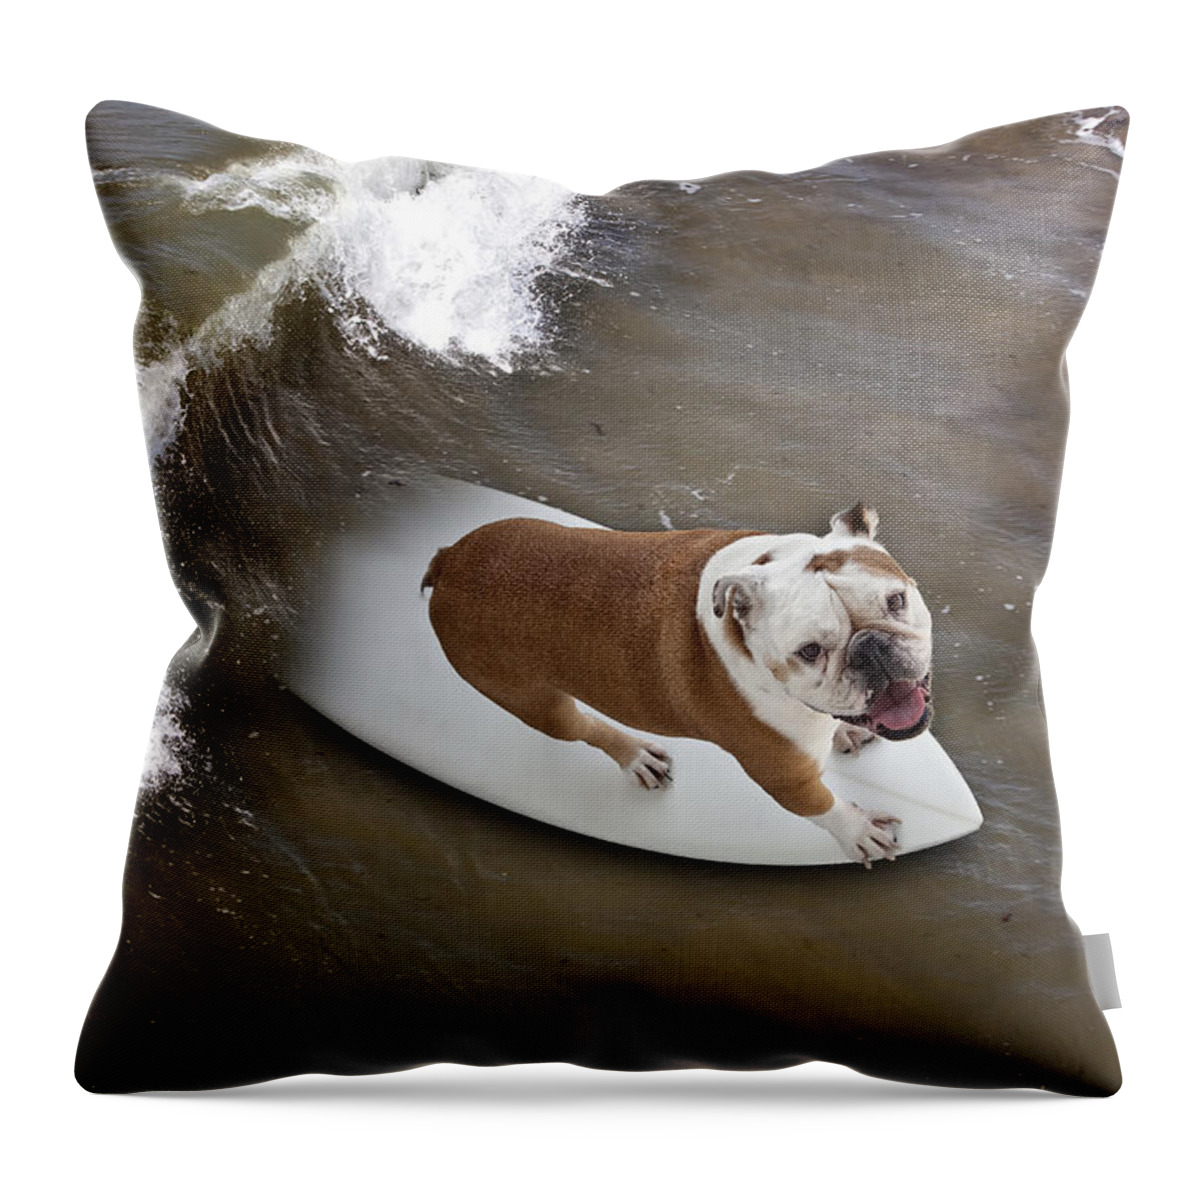 Bulldog Throw Pillow featuring the photograph Surfer Dog by John A Rodriguez